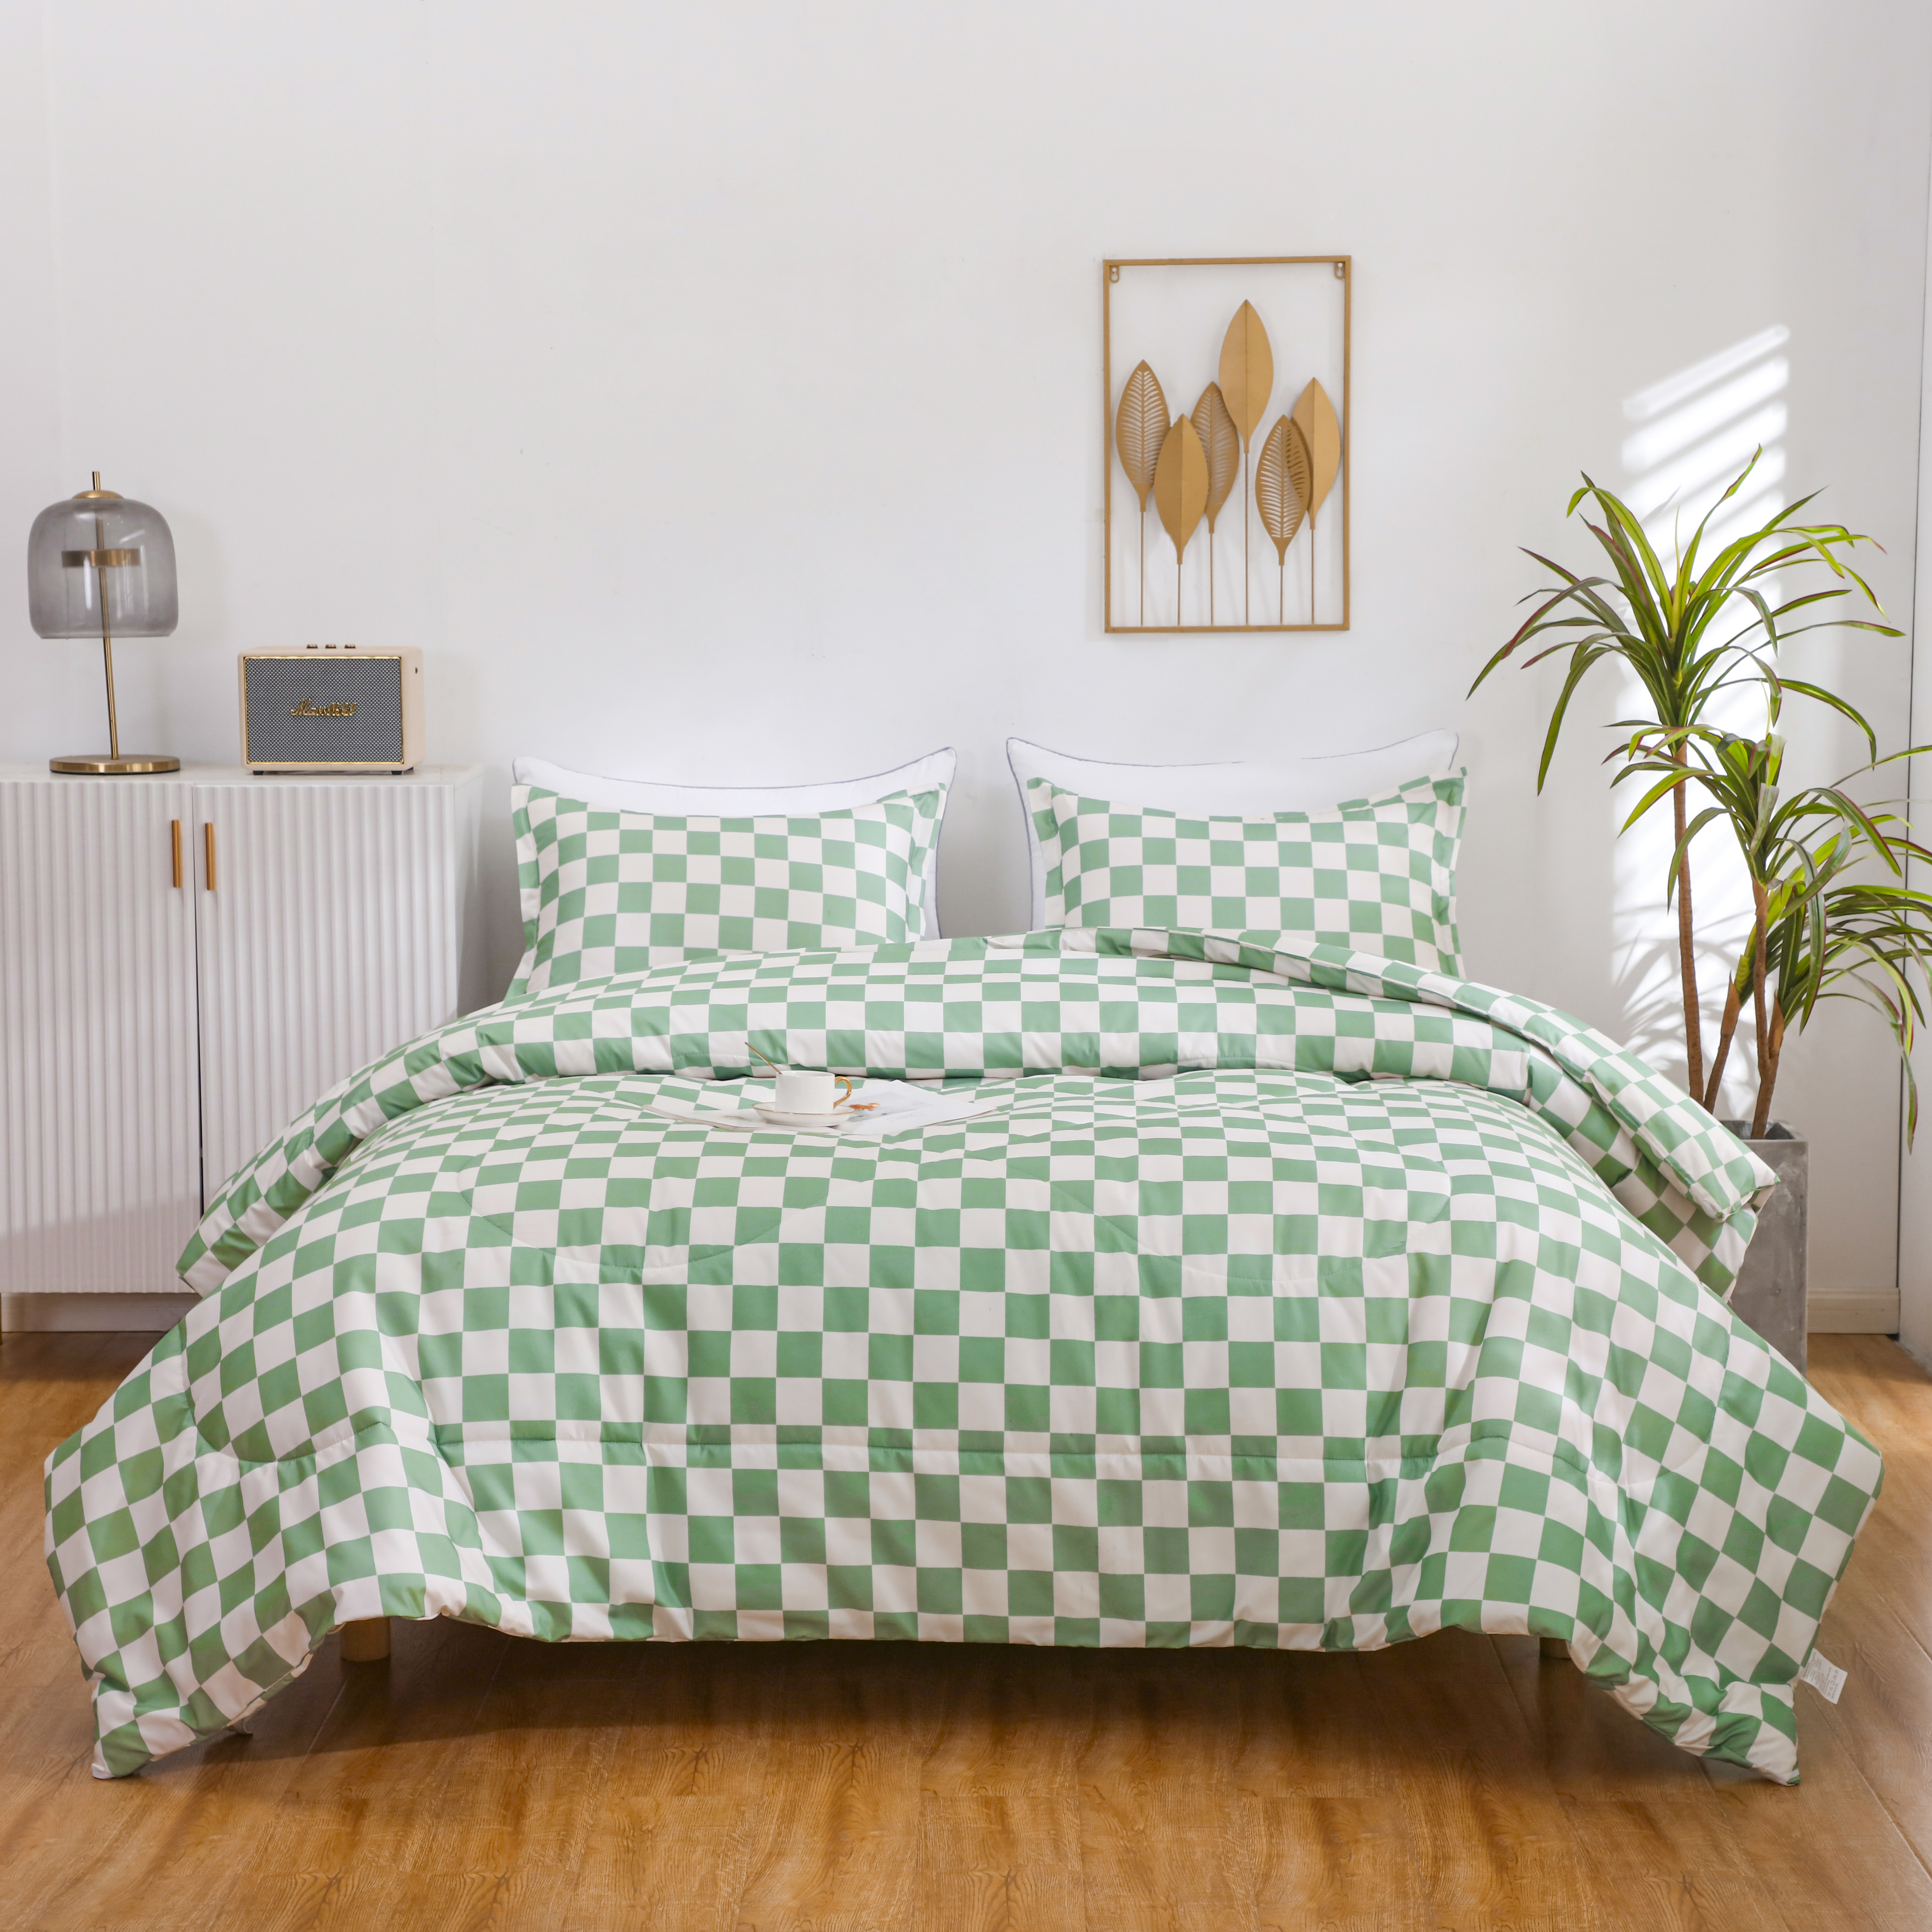 LUCKYBULL Full Comforter Set 3 Pieces Fluffy Bedding Set Sage Green Checkerboard Grid Down Alternative Comforter, Plaid Checkered Soft Comforter with 2 Pillowcases All Season, Green Beige